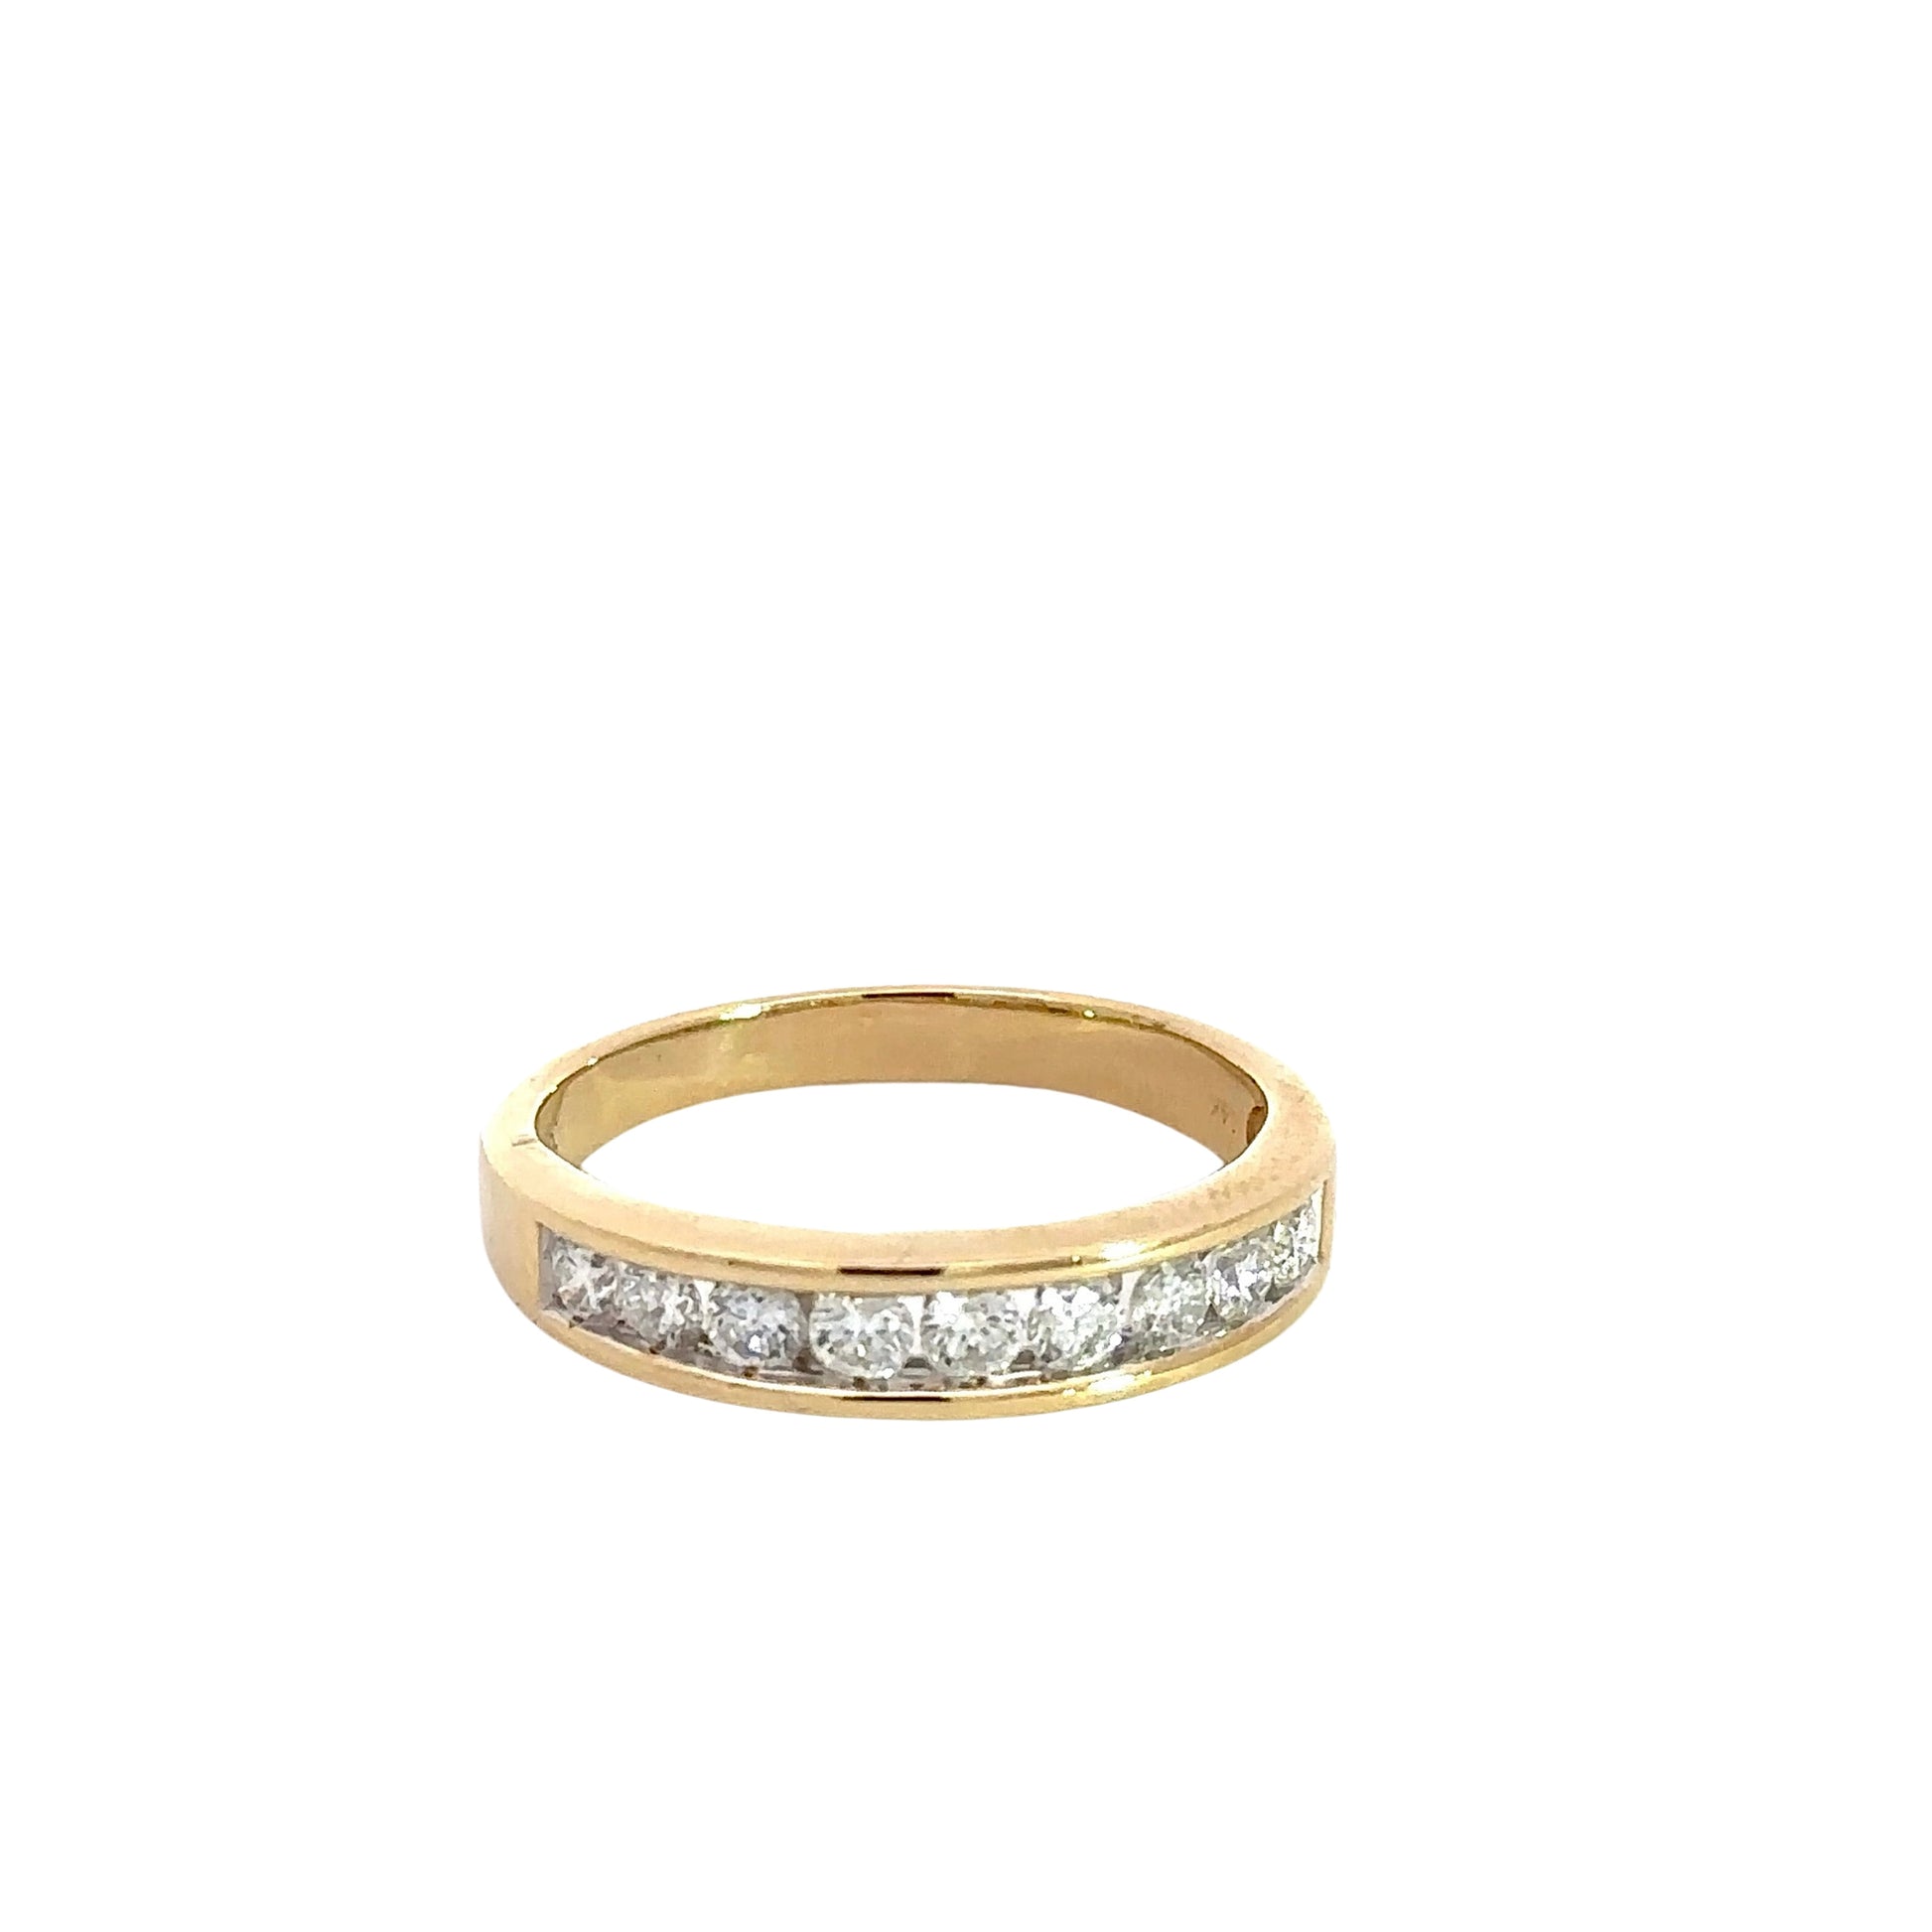 Front of diamond band ring with 10 round diamonds on half of the ring